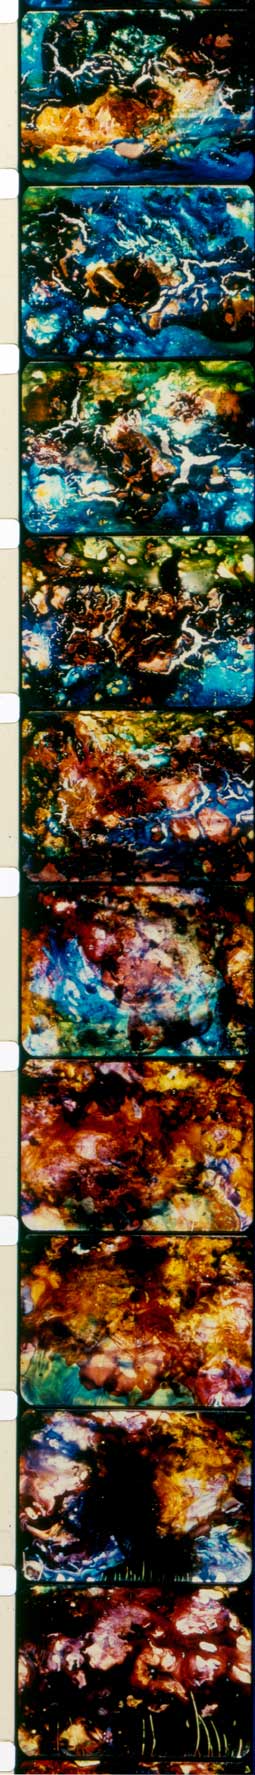 brakhage-film-scan-existence-is-song